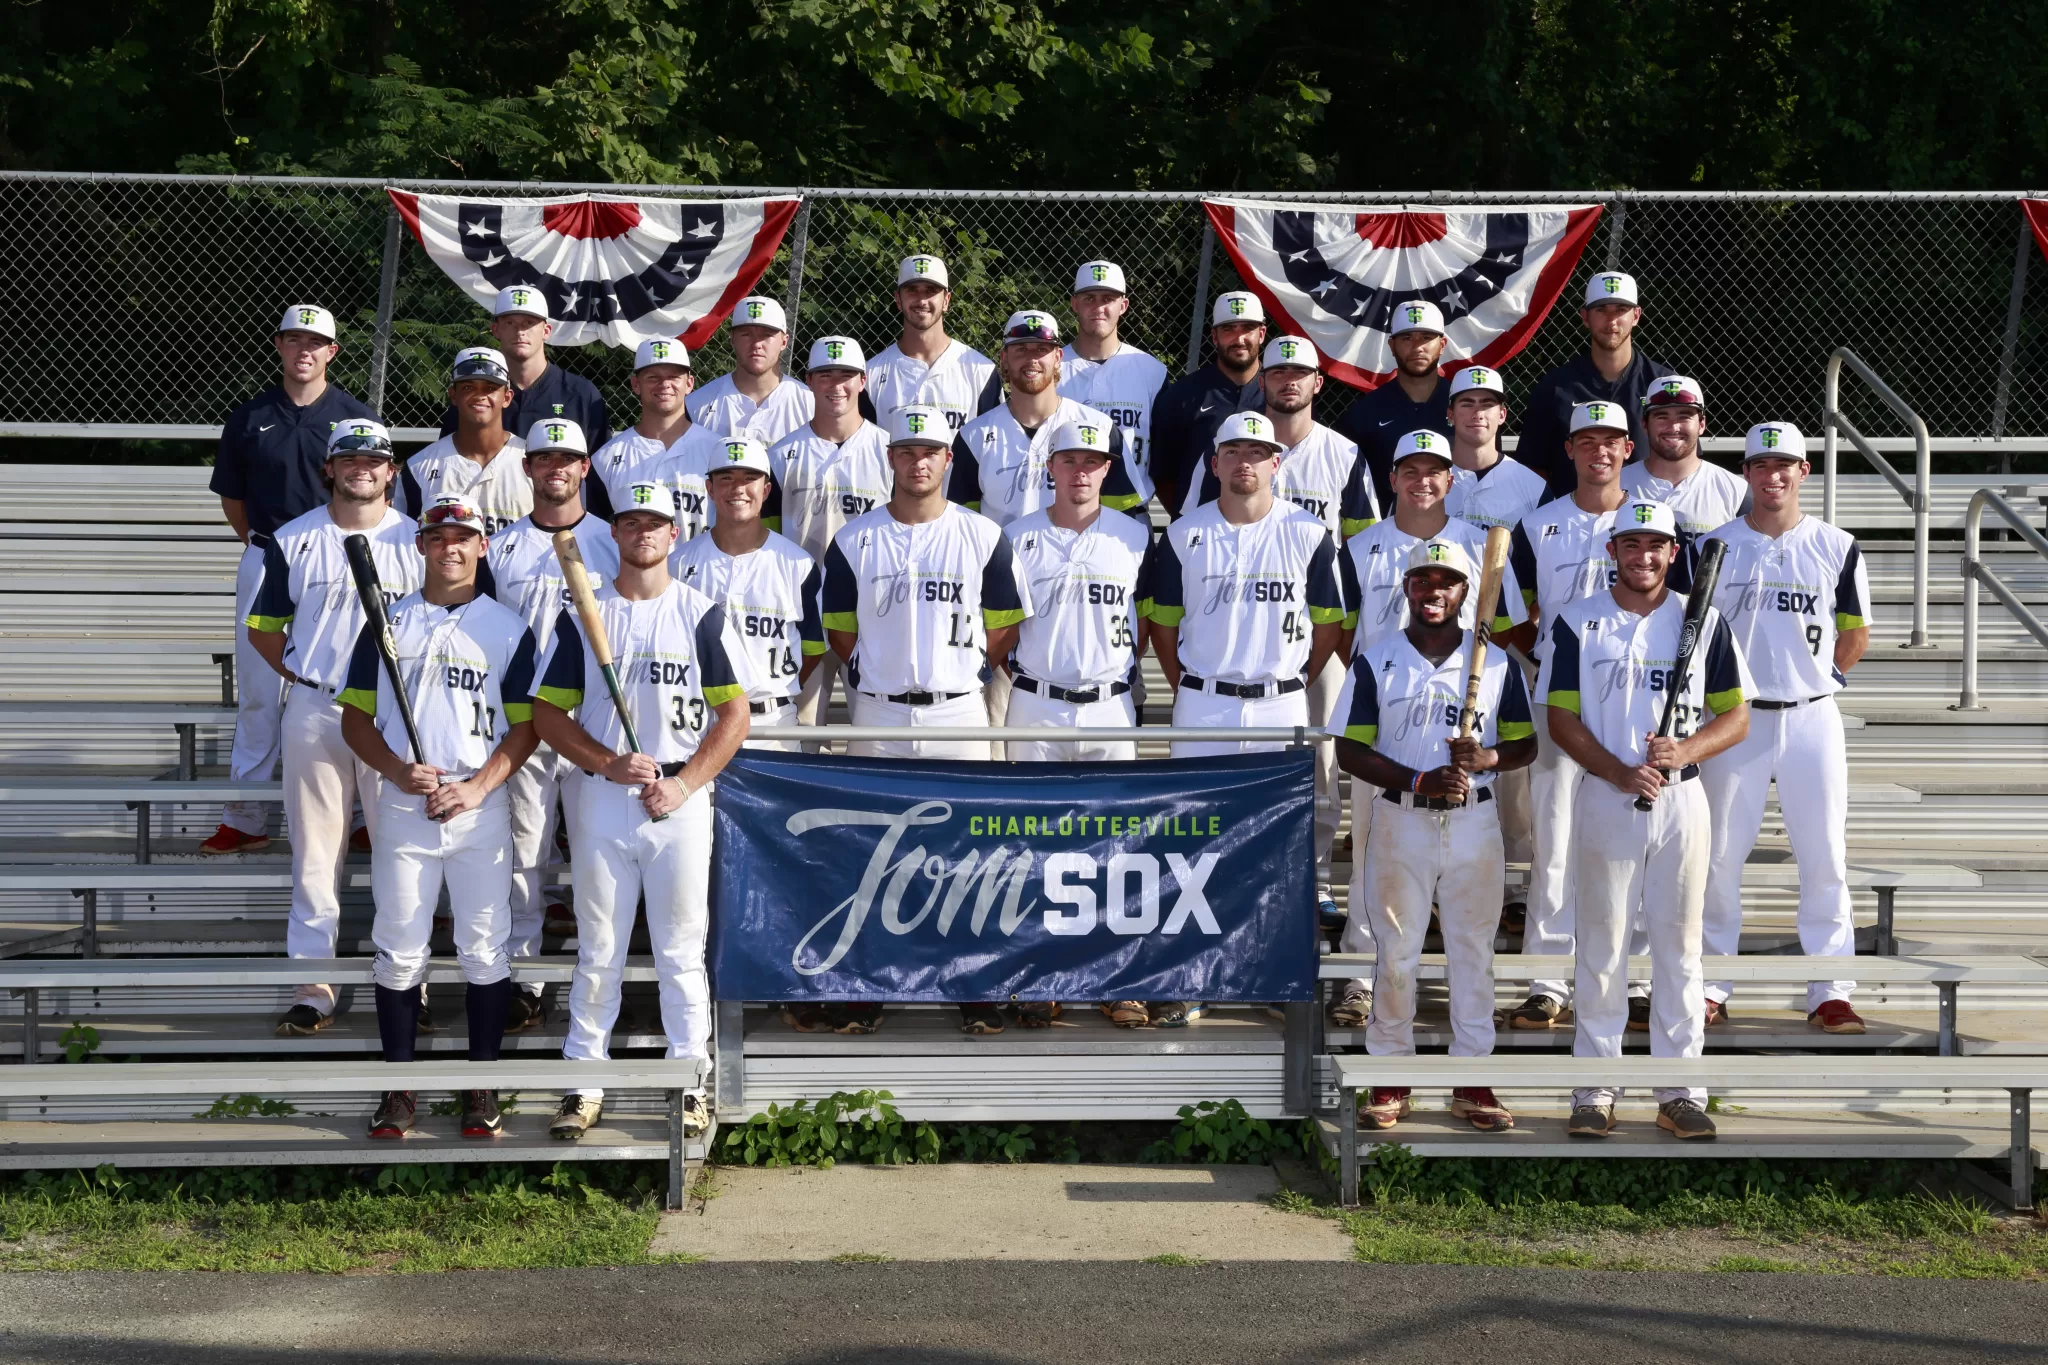 Photo of the Tom Sox team lined up on the bleachers. The middle features the Tom Sox logo and there is bunting in the back. The players are wearing white jerseys.